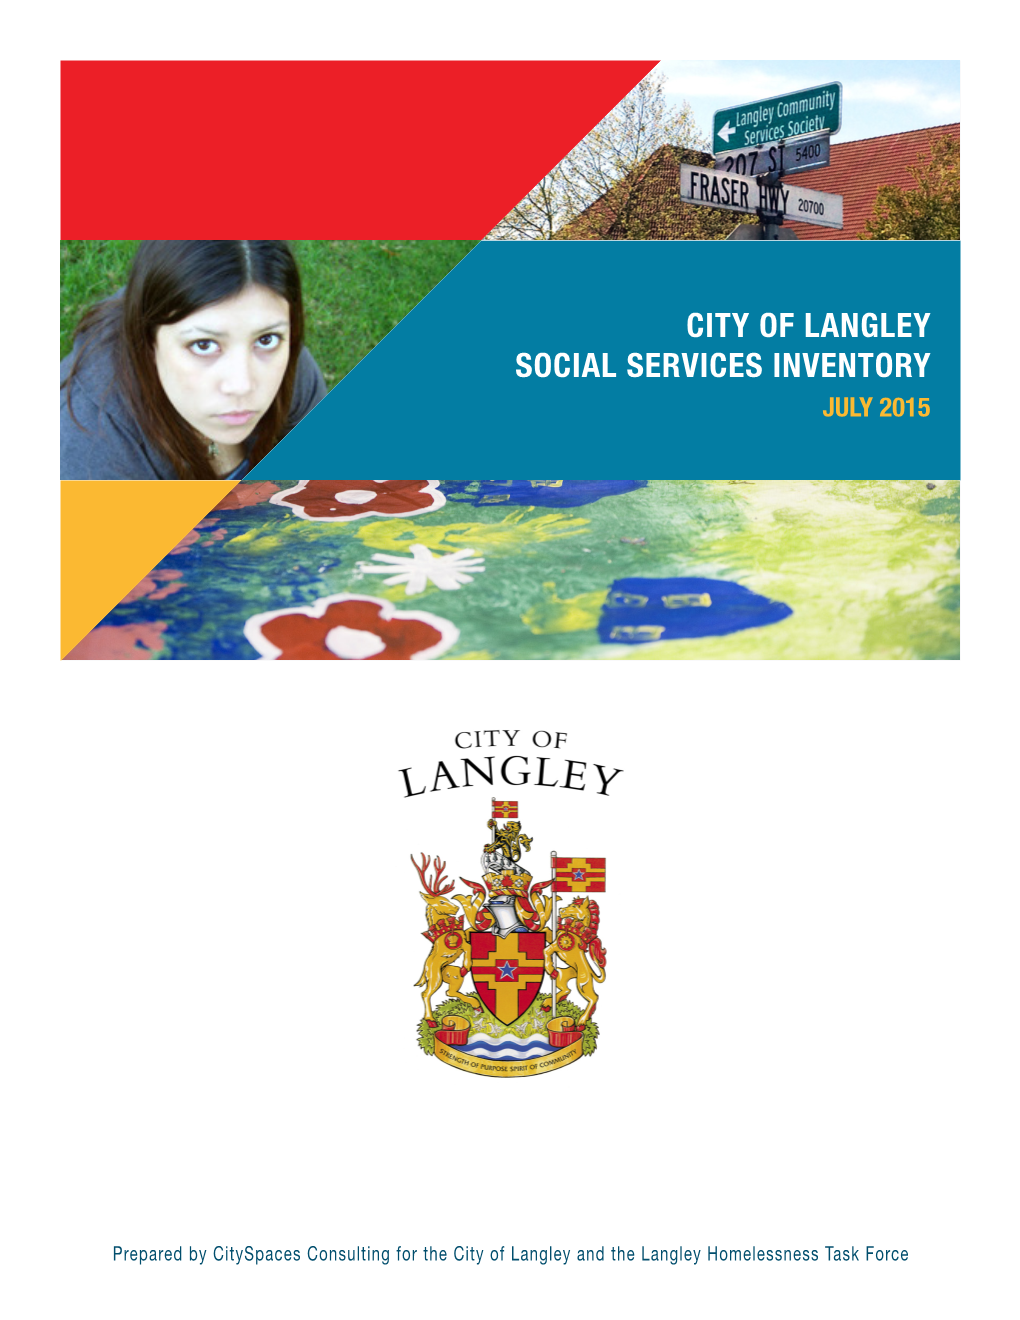 City of Langley Social Services Inventory July 2015